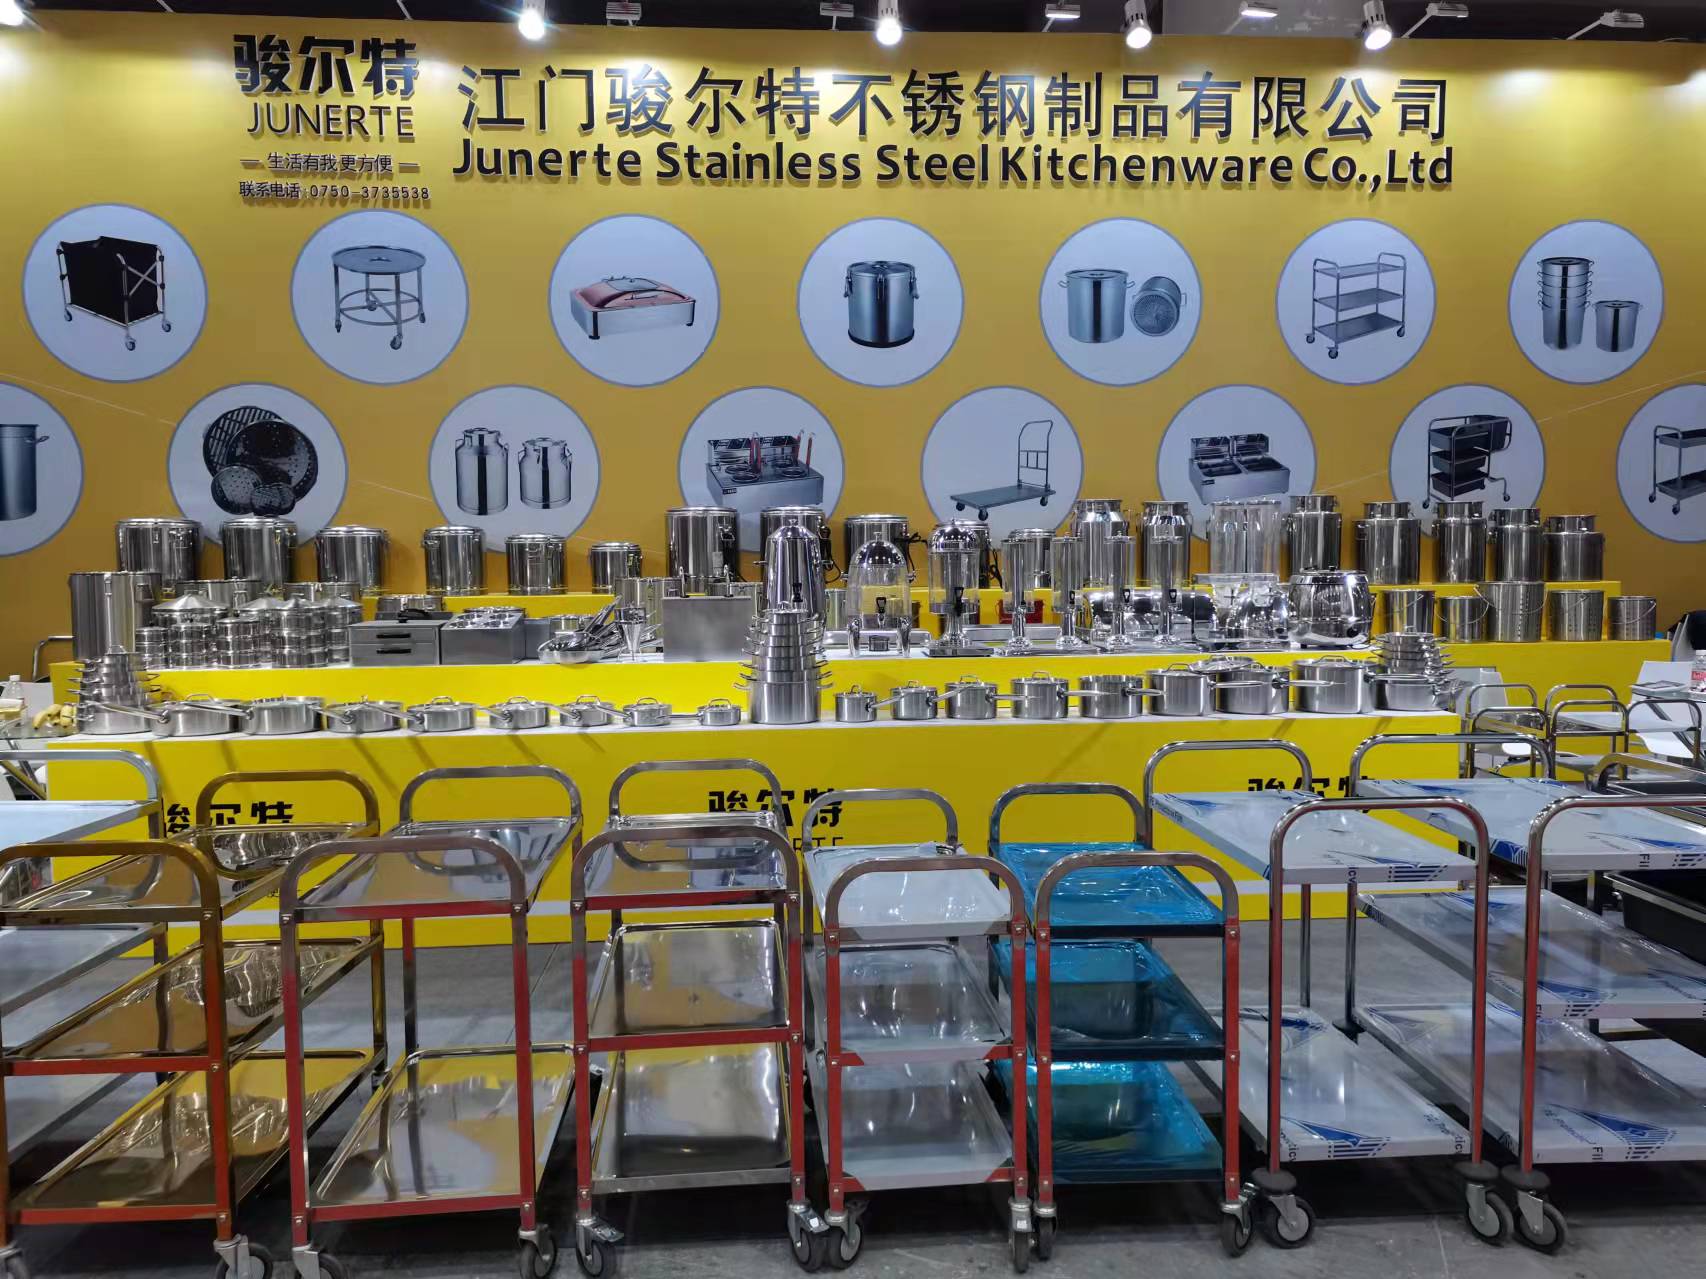 28th Guangzhou Hotel Equipment and Supply Exhibition